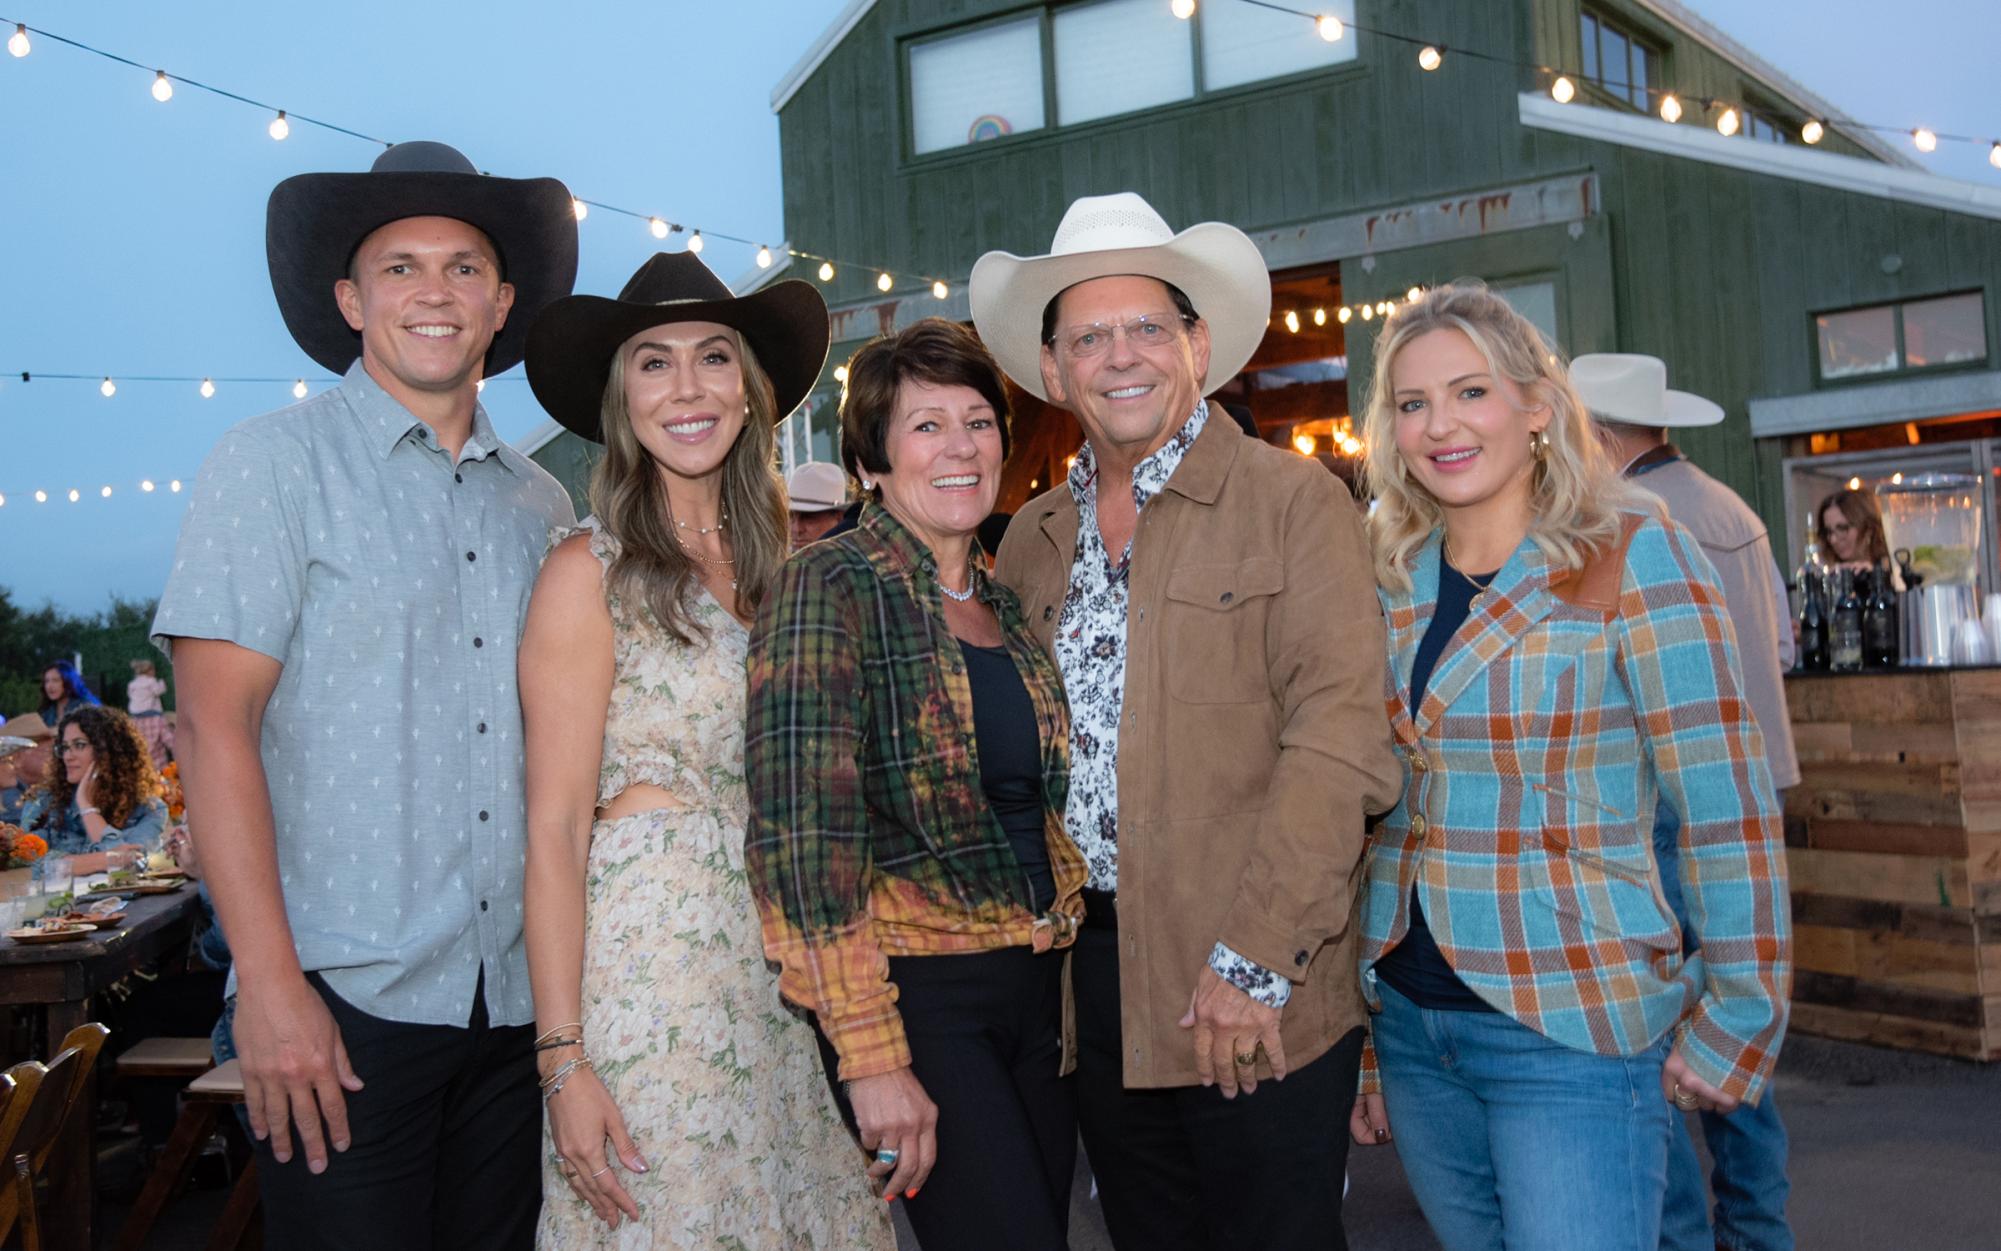 More+than+200+Scripps+Memorial+Hospital+Encinitas+supporters+enjoyed+an+evening+of+music%2C+dancing%2C+food+and+fun+at+an+Oct.+12+Barn+Bash+to+raise+funds+for+growth%2C+innovation+and+expansion+on+the+campus+as+part+of+the+Here+for+Good+Capital+Campaign.